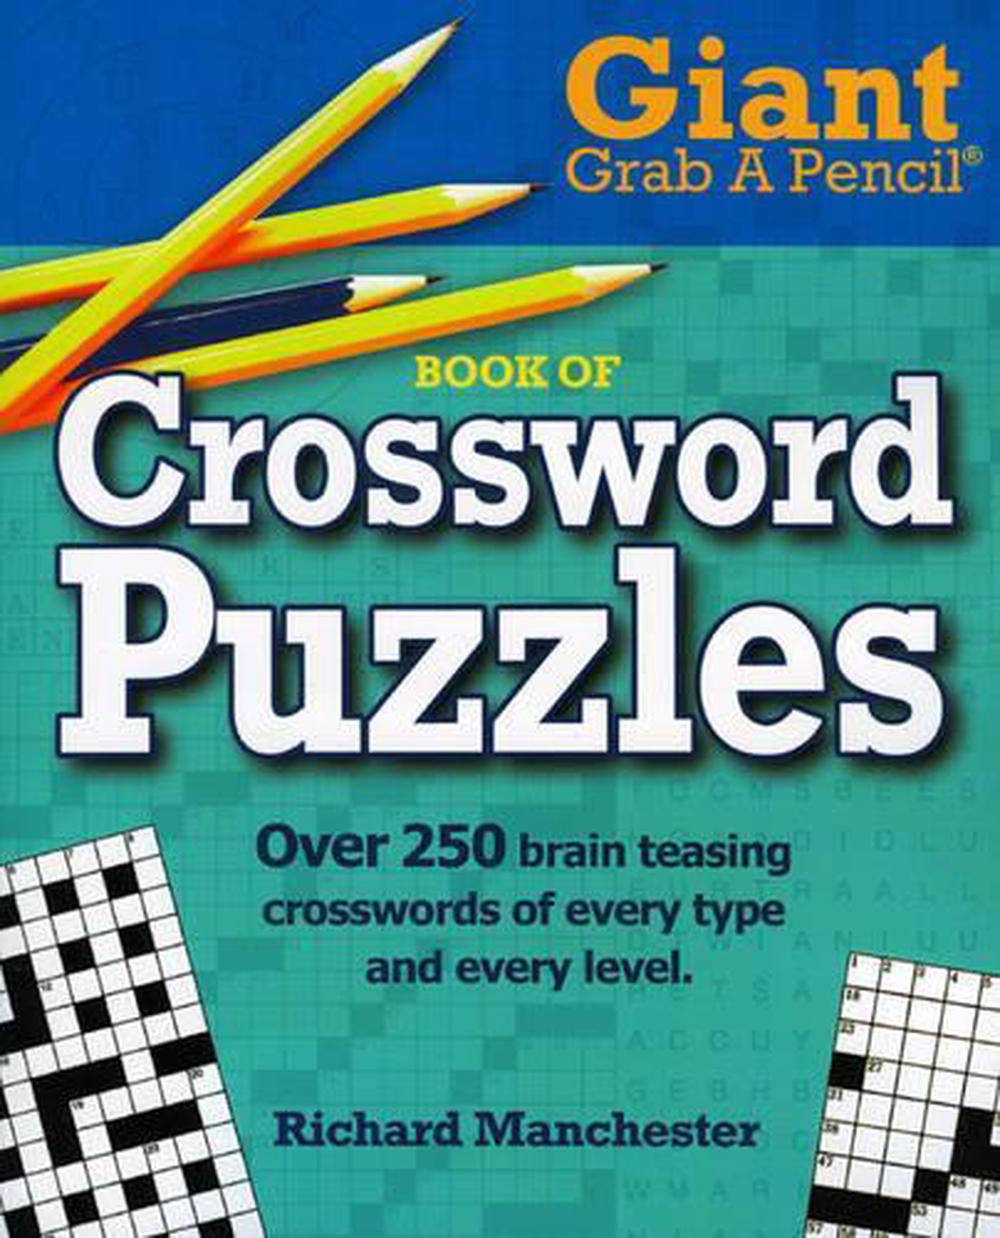 Book of Crossword Puzzles by Richard Manchester Paperback